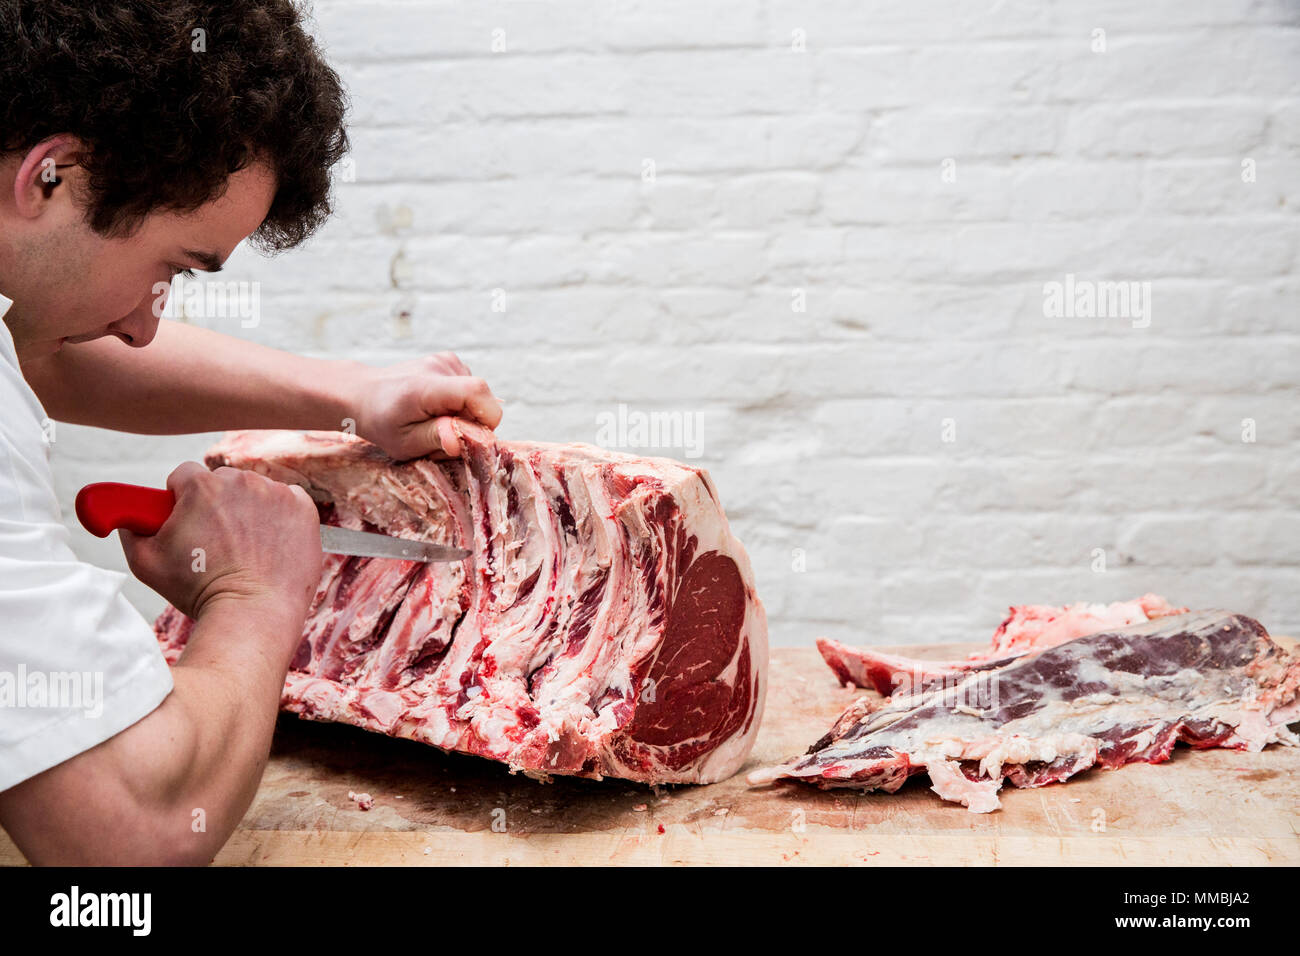 Close up of man wearing apron standing at a wooden butcher's block, butchering beef forerib. Stock Photo